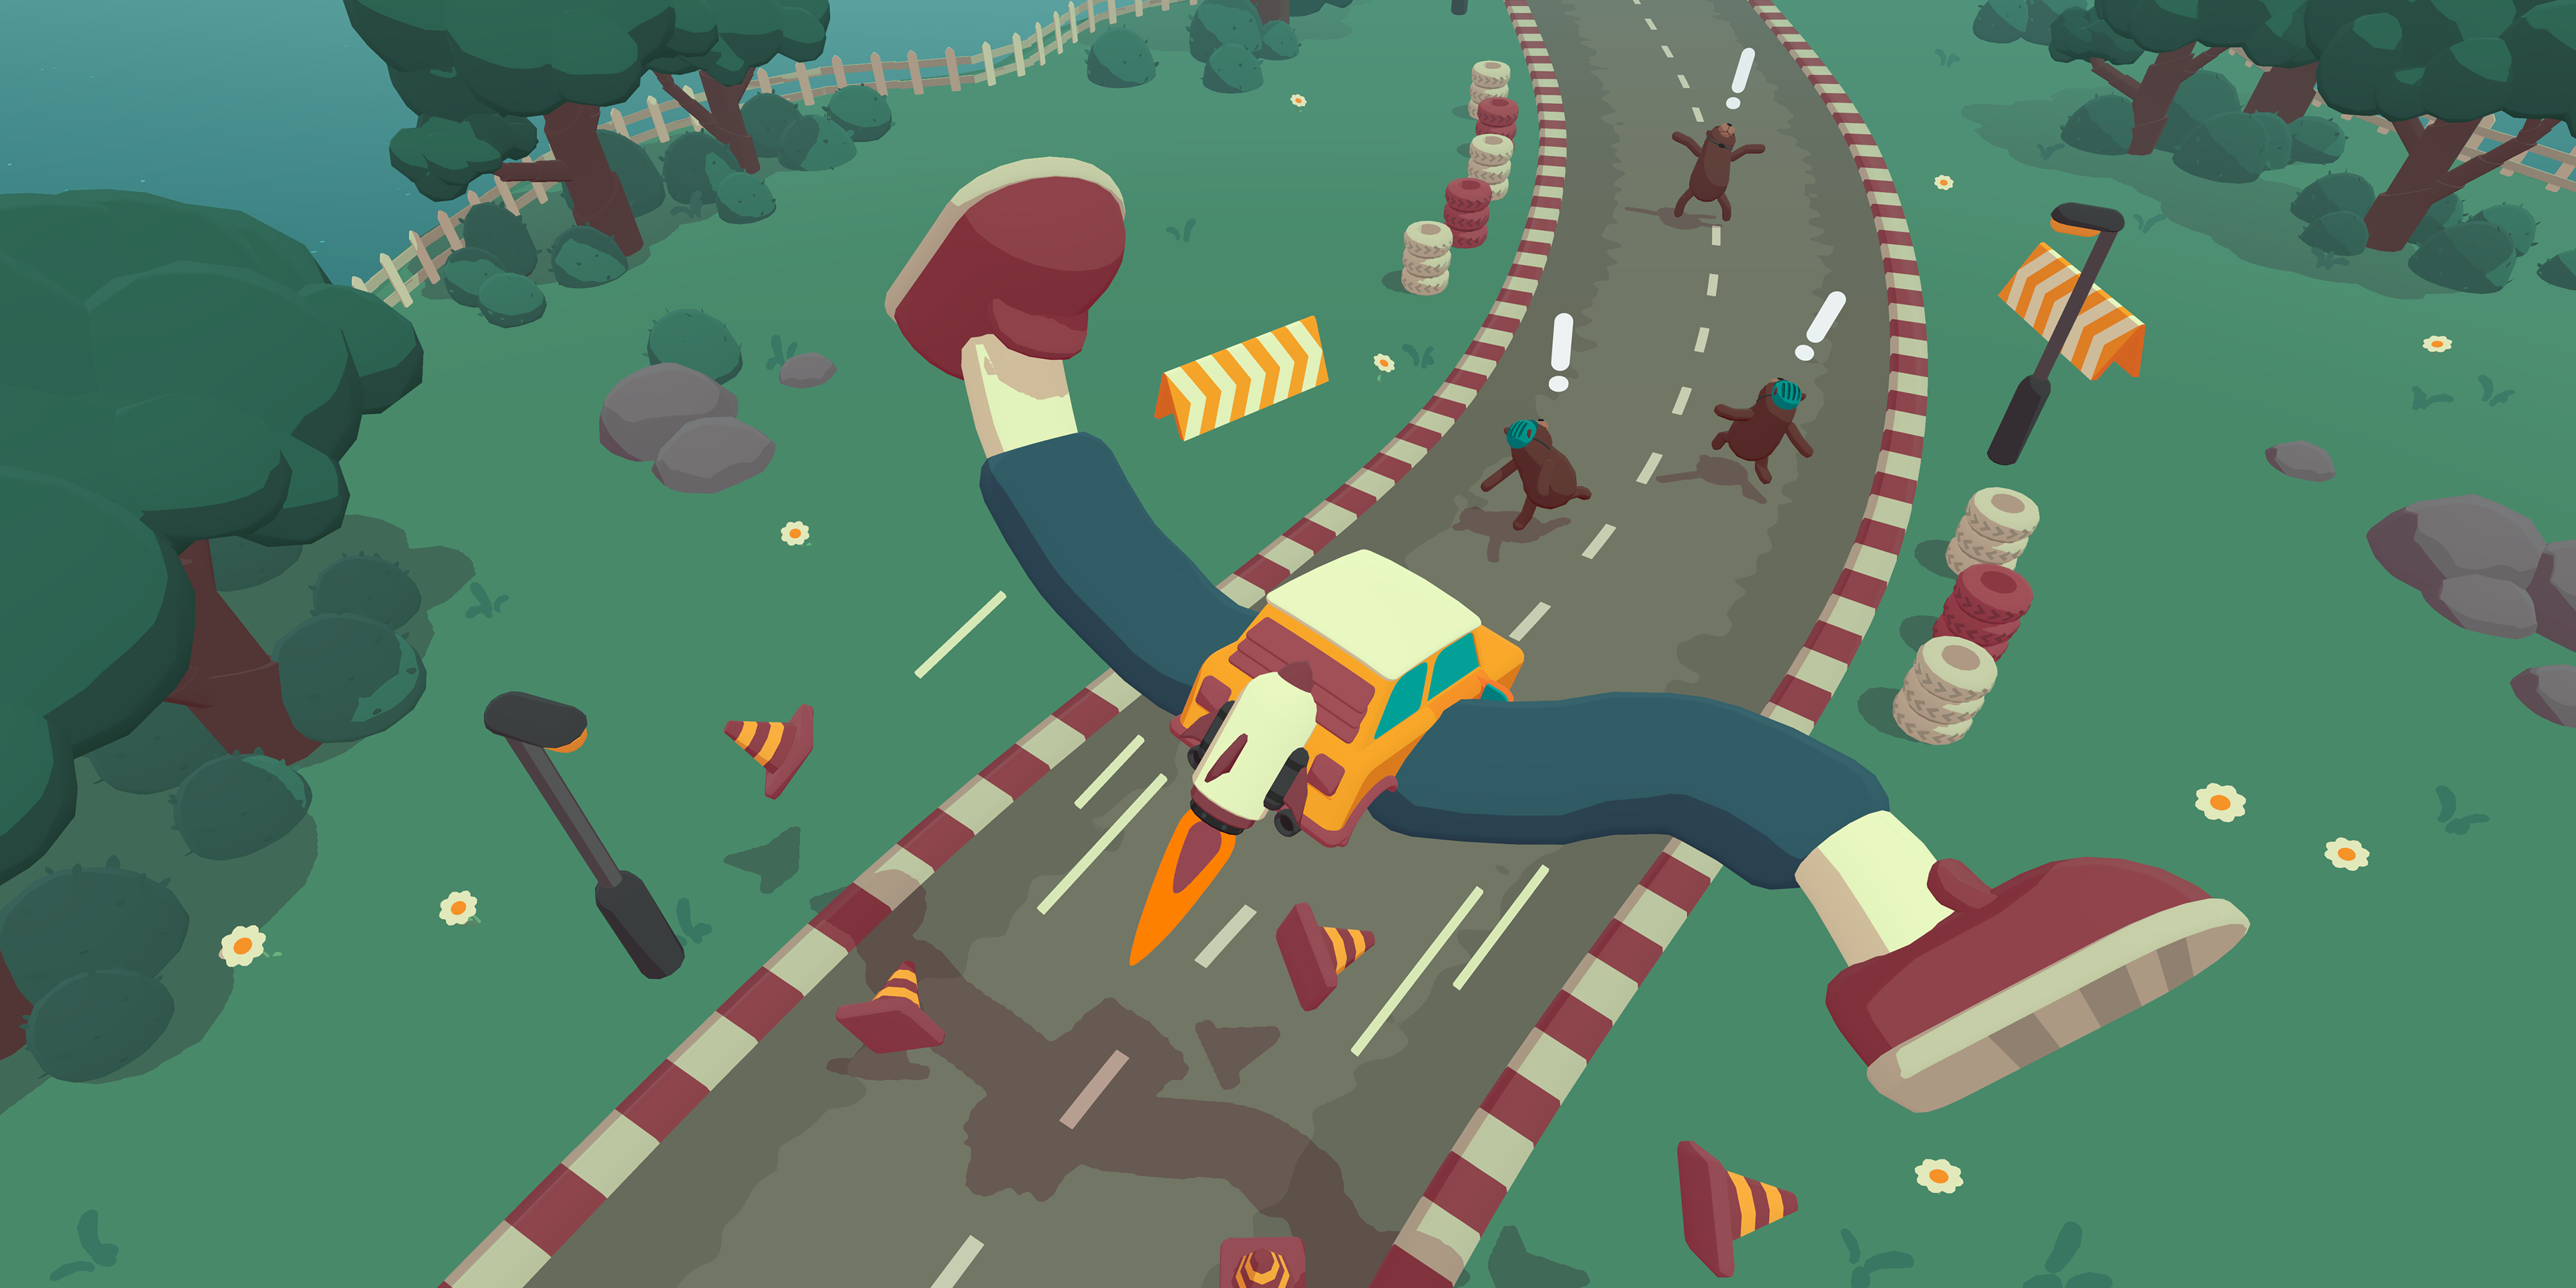 What the Car? was awarded Mobile Game of the Year at the 27th annual DICE Awards